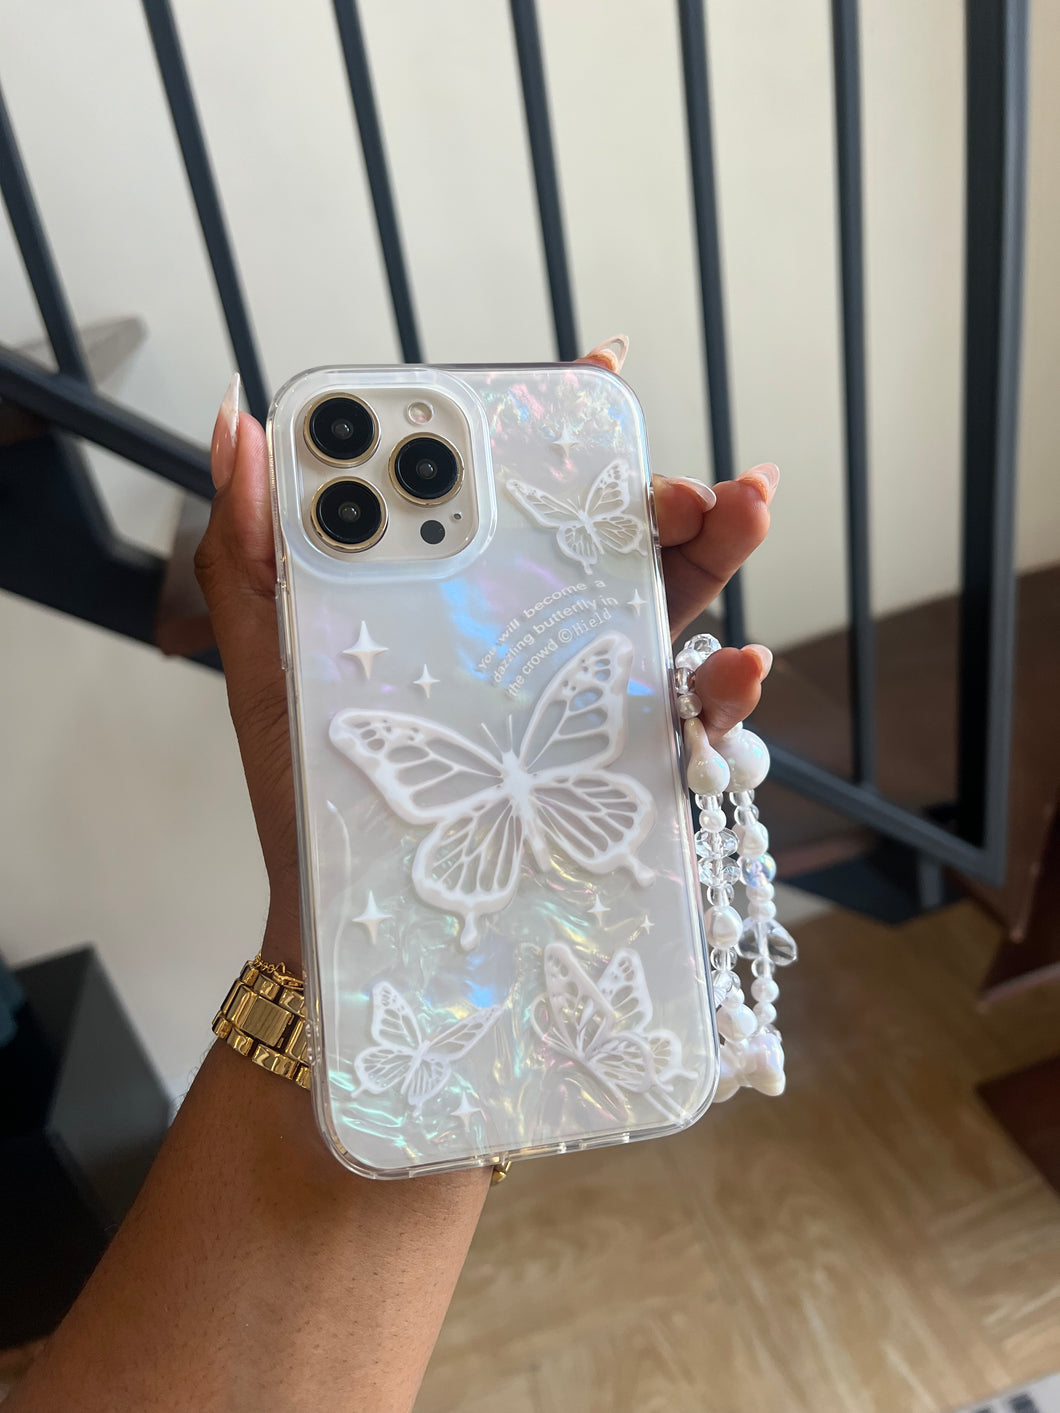 Holographic translucent butterfly case (can be bought with or without the charm holder)